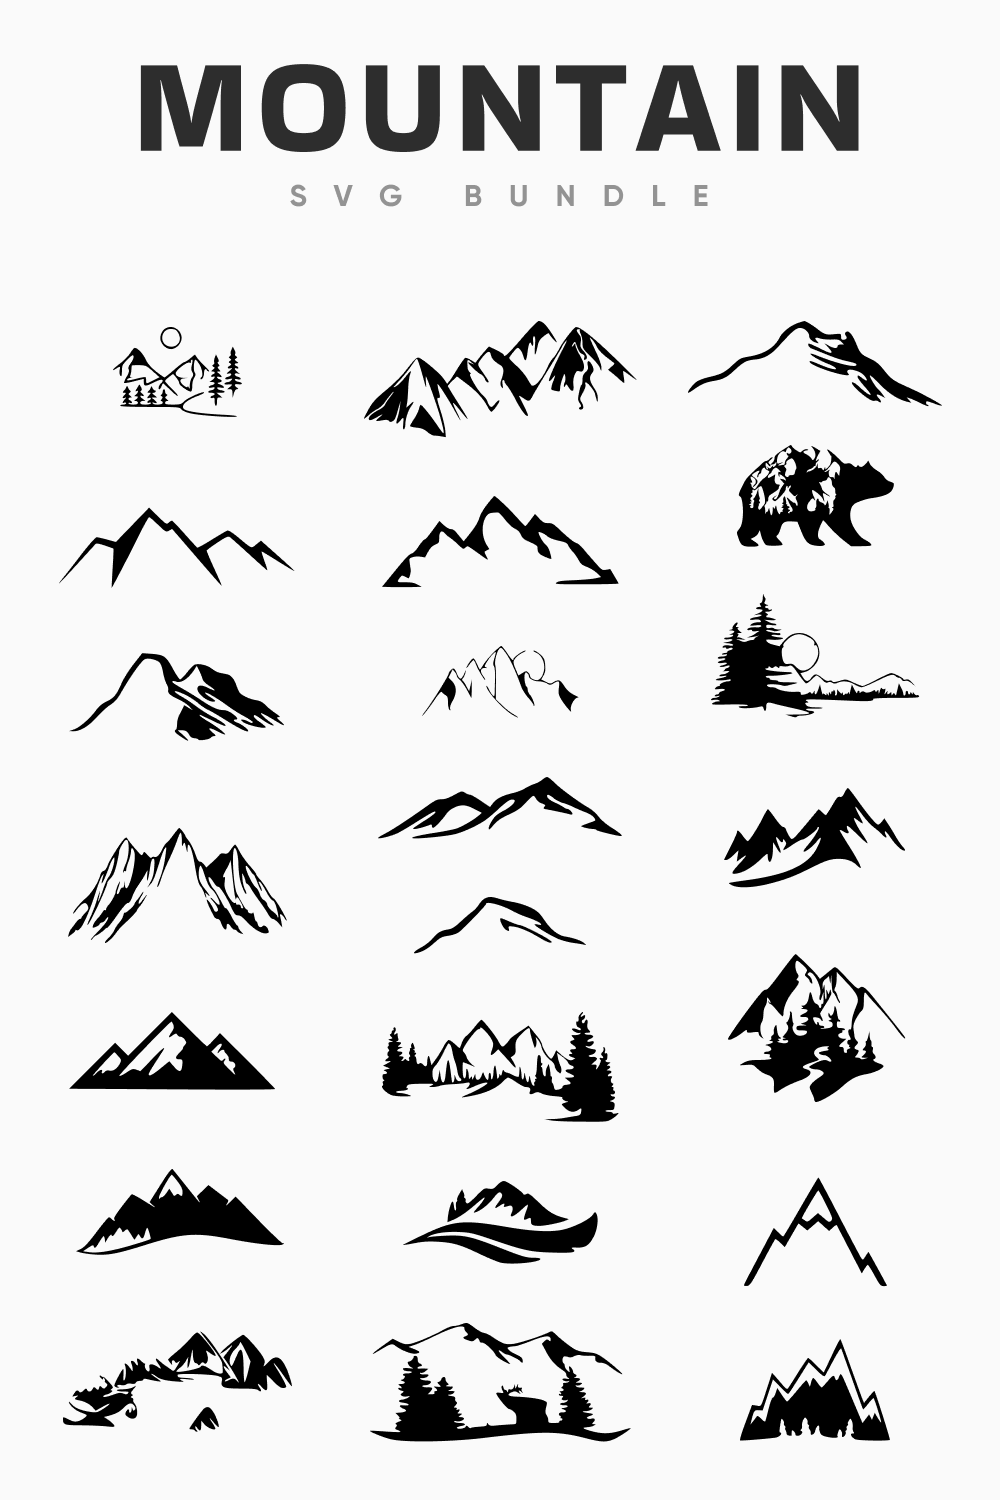 Different mountains are depicted for your logos.